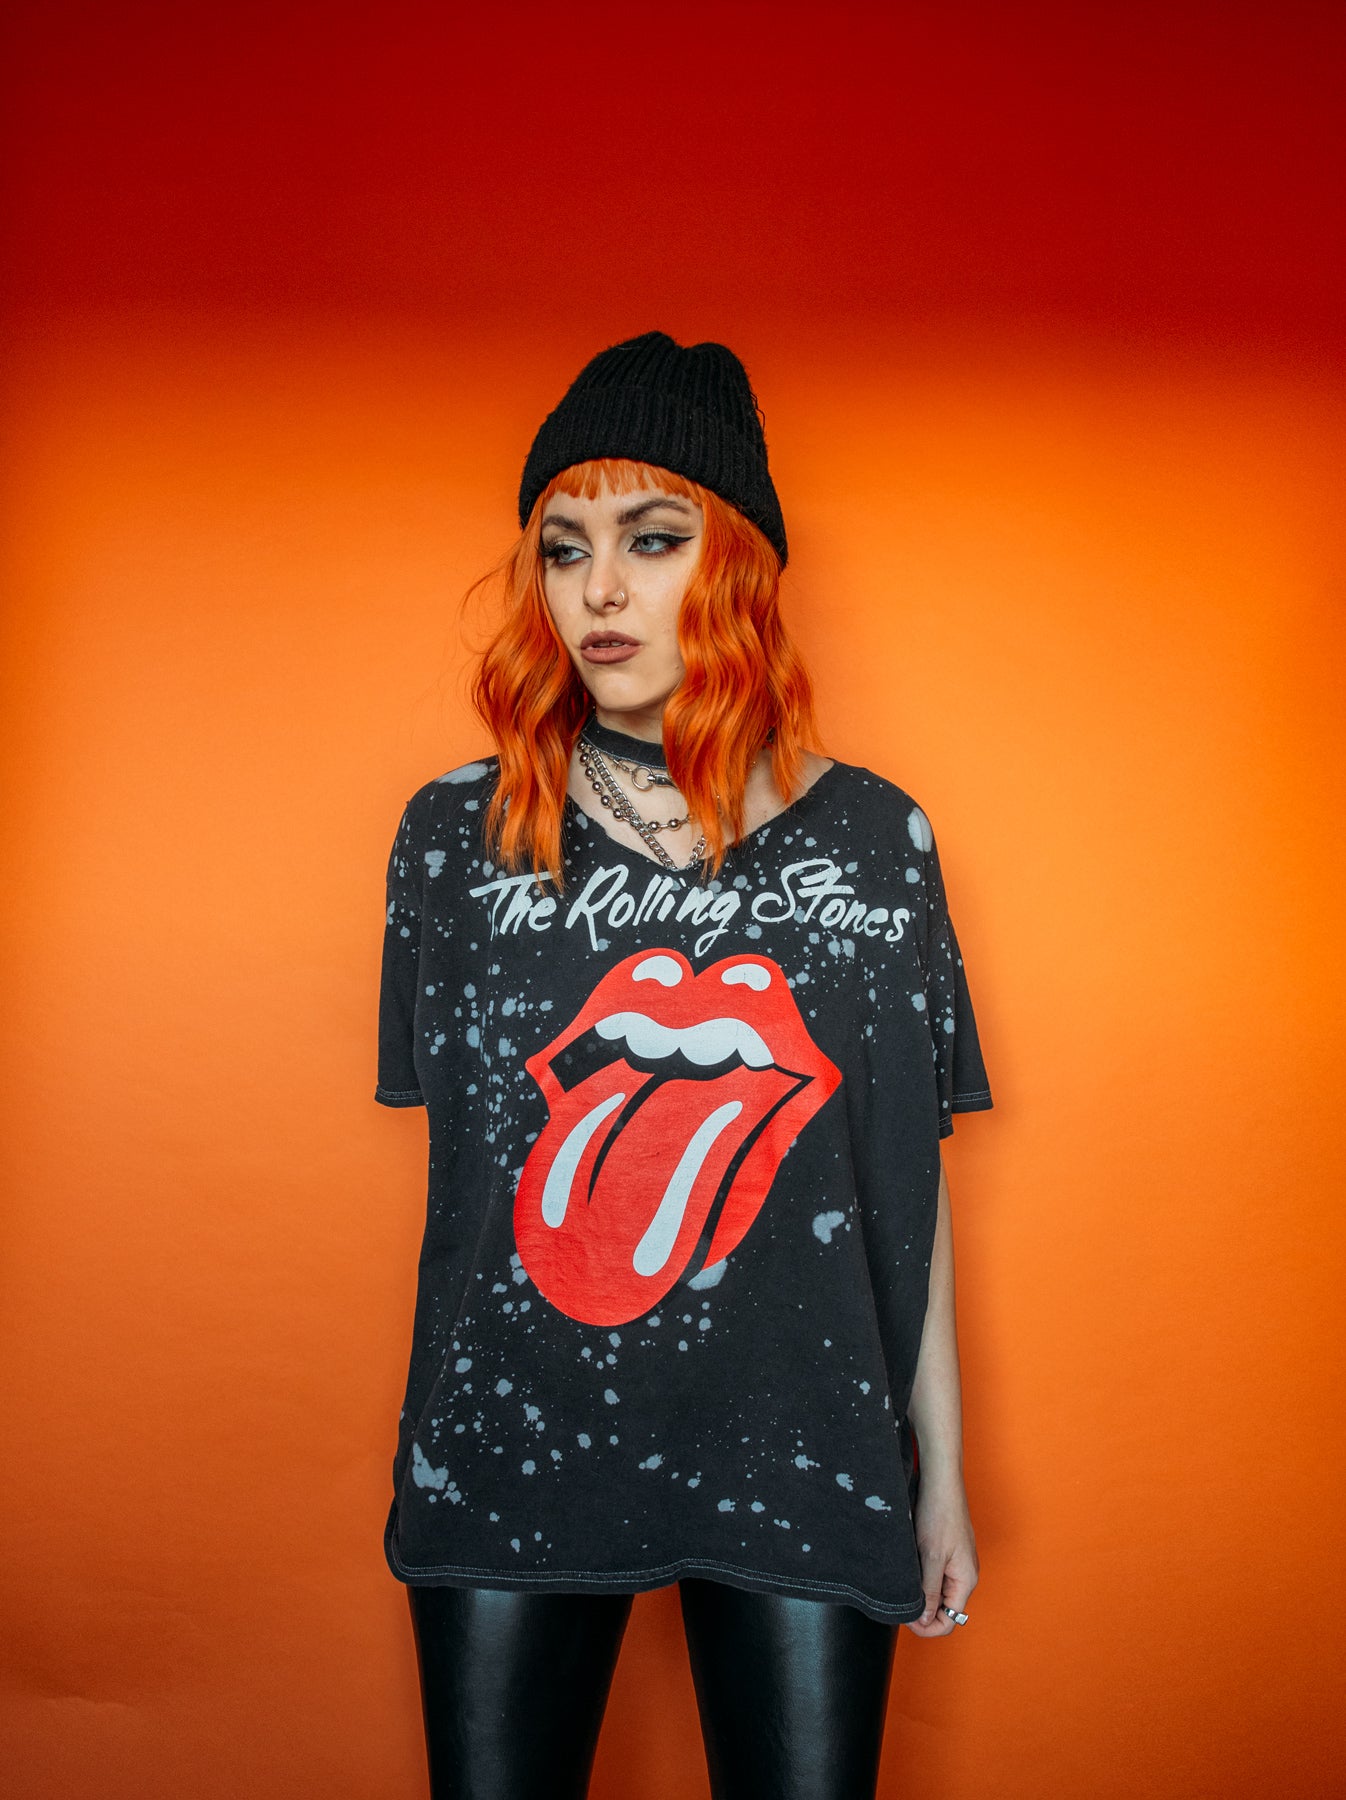 The Rolling Stones Neck Cut Out Bleached Tee